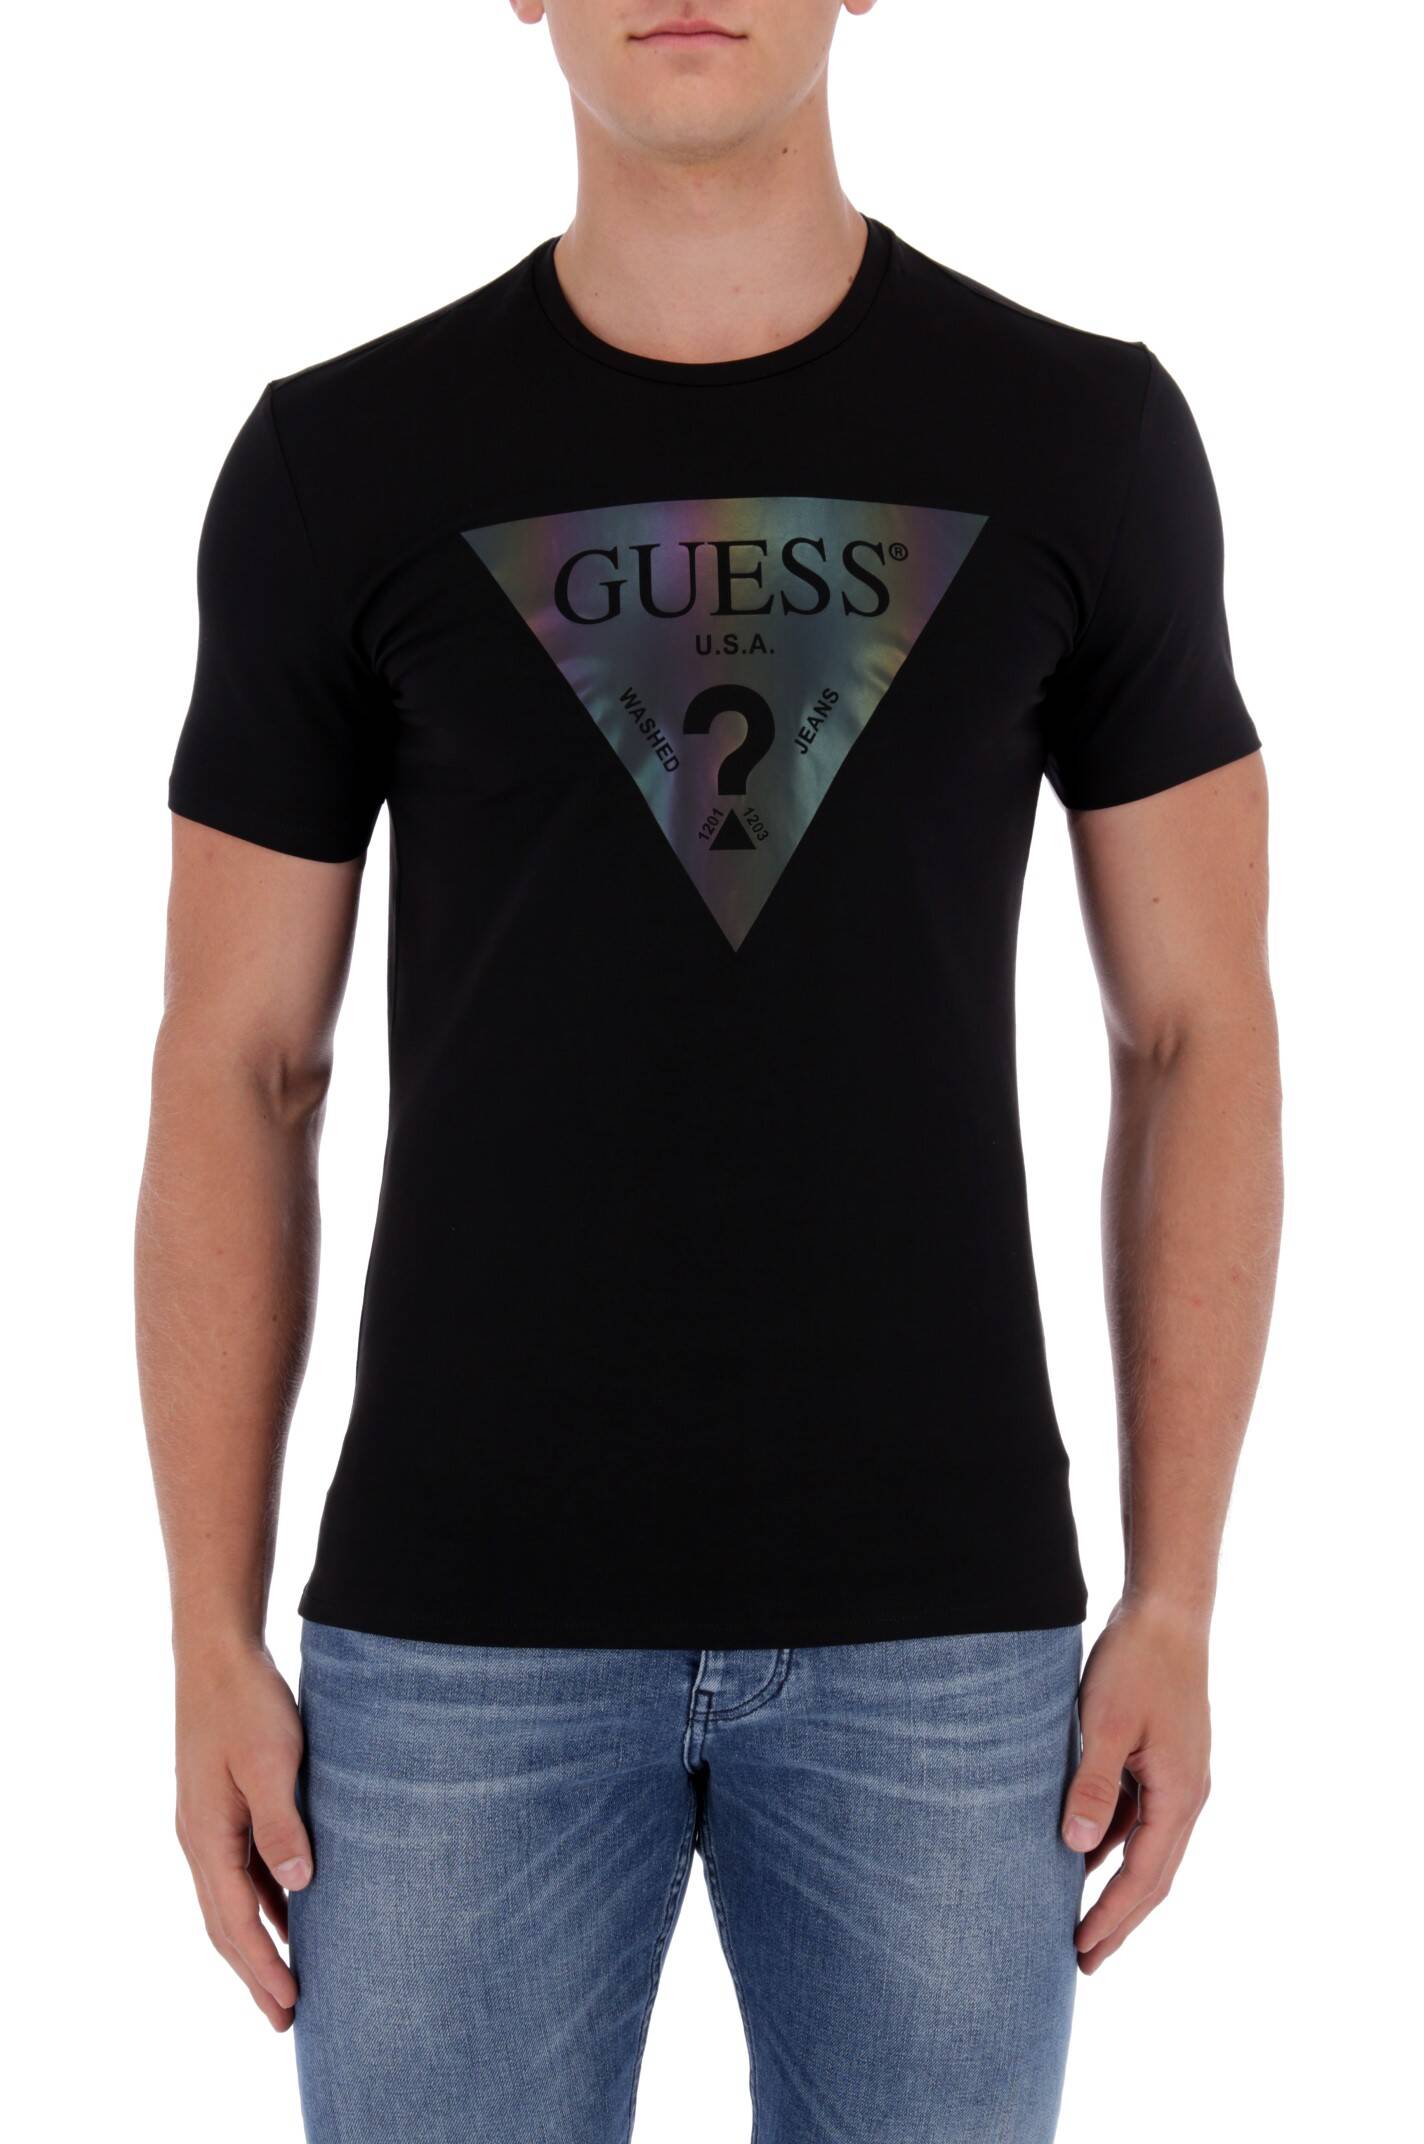 guess t shirt fit